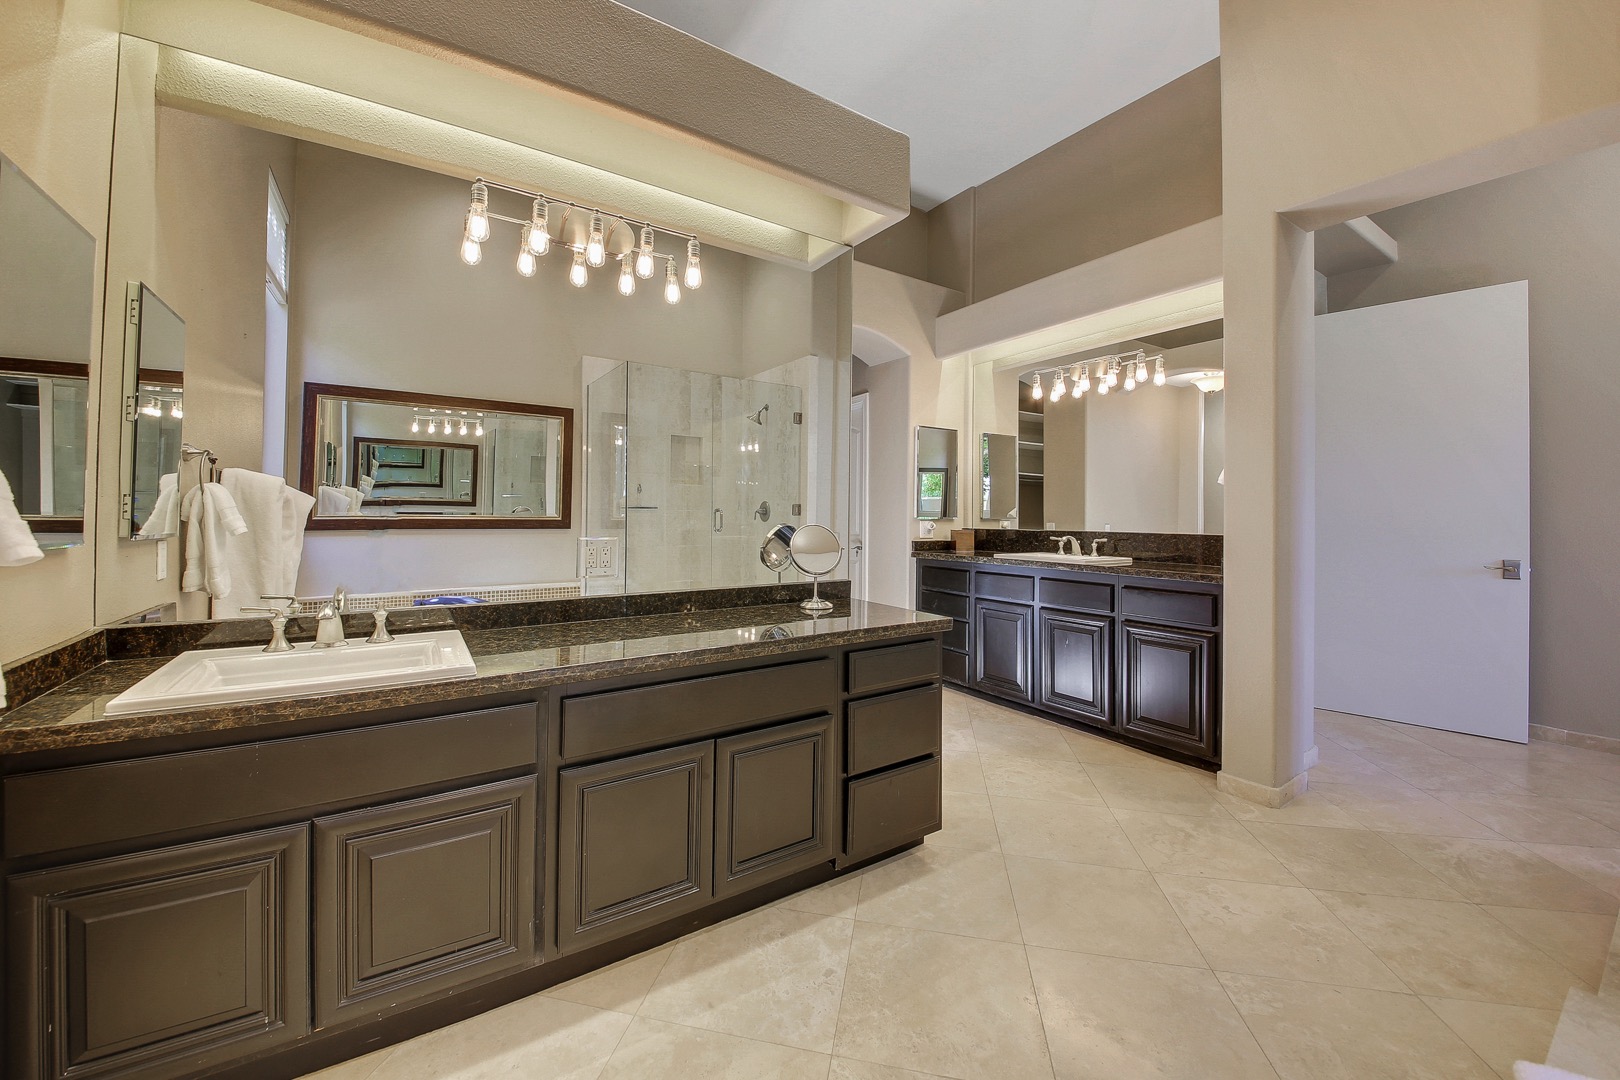 The master bathroom is enormous with his & hers separate sinks